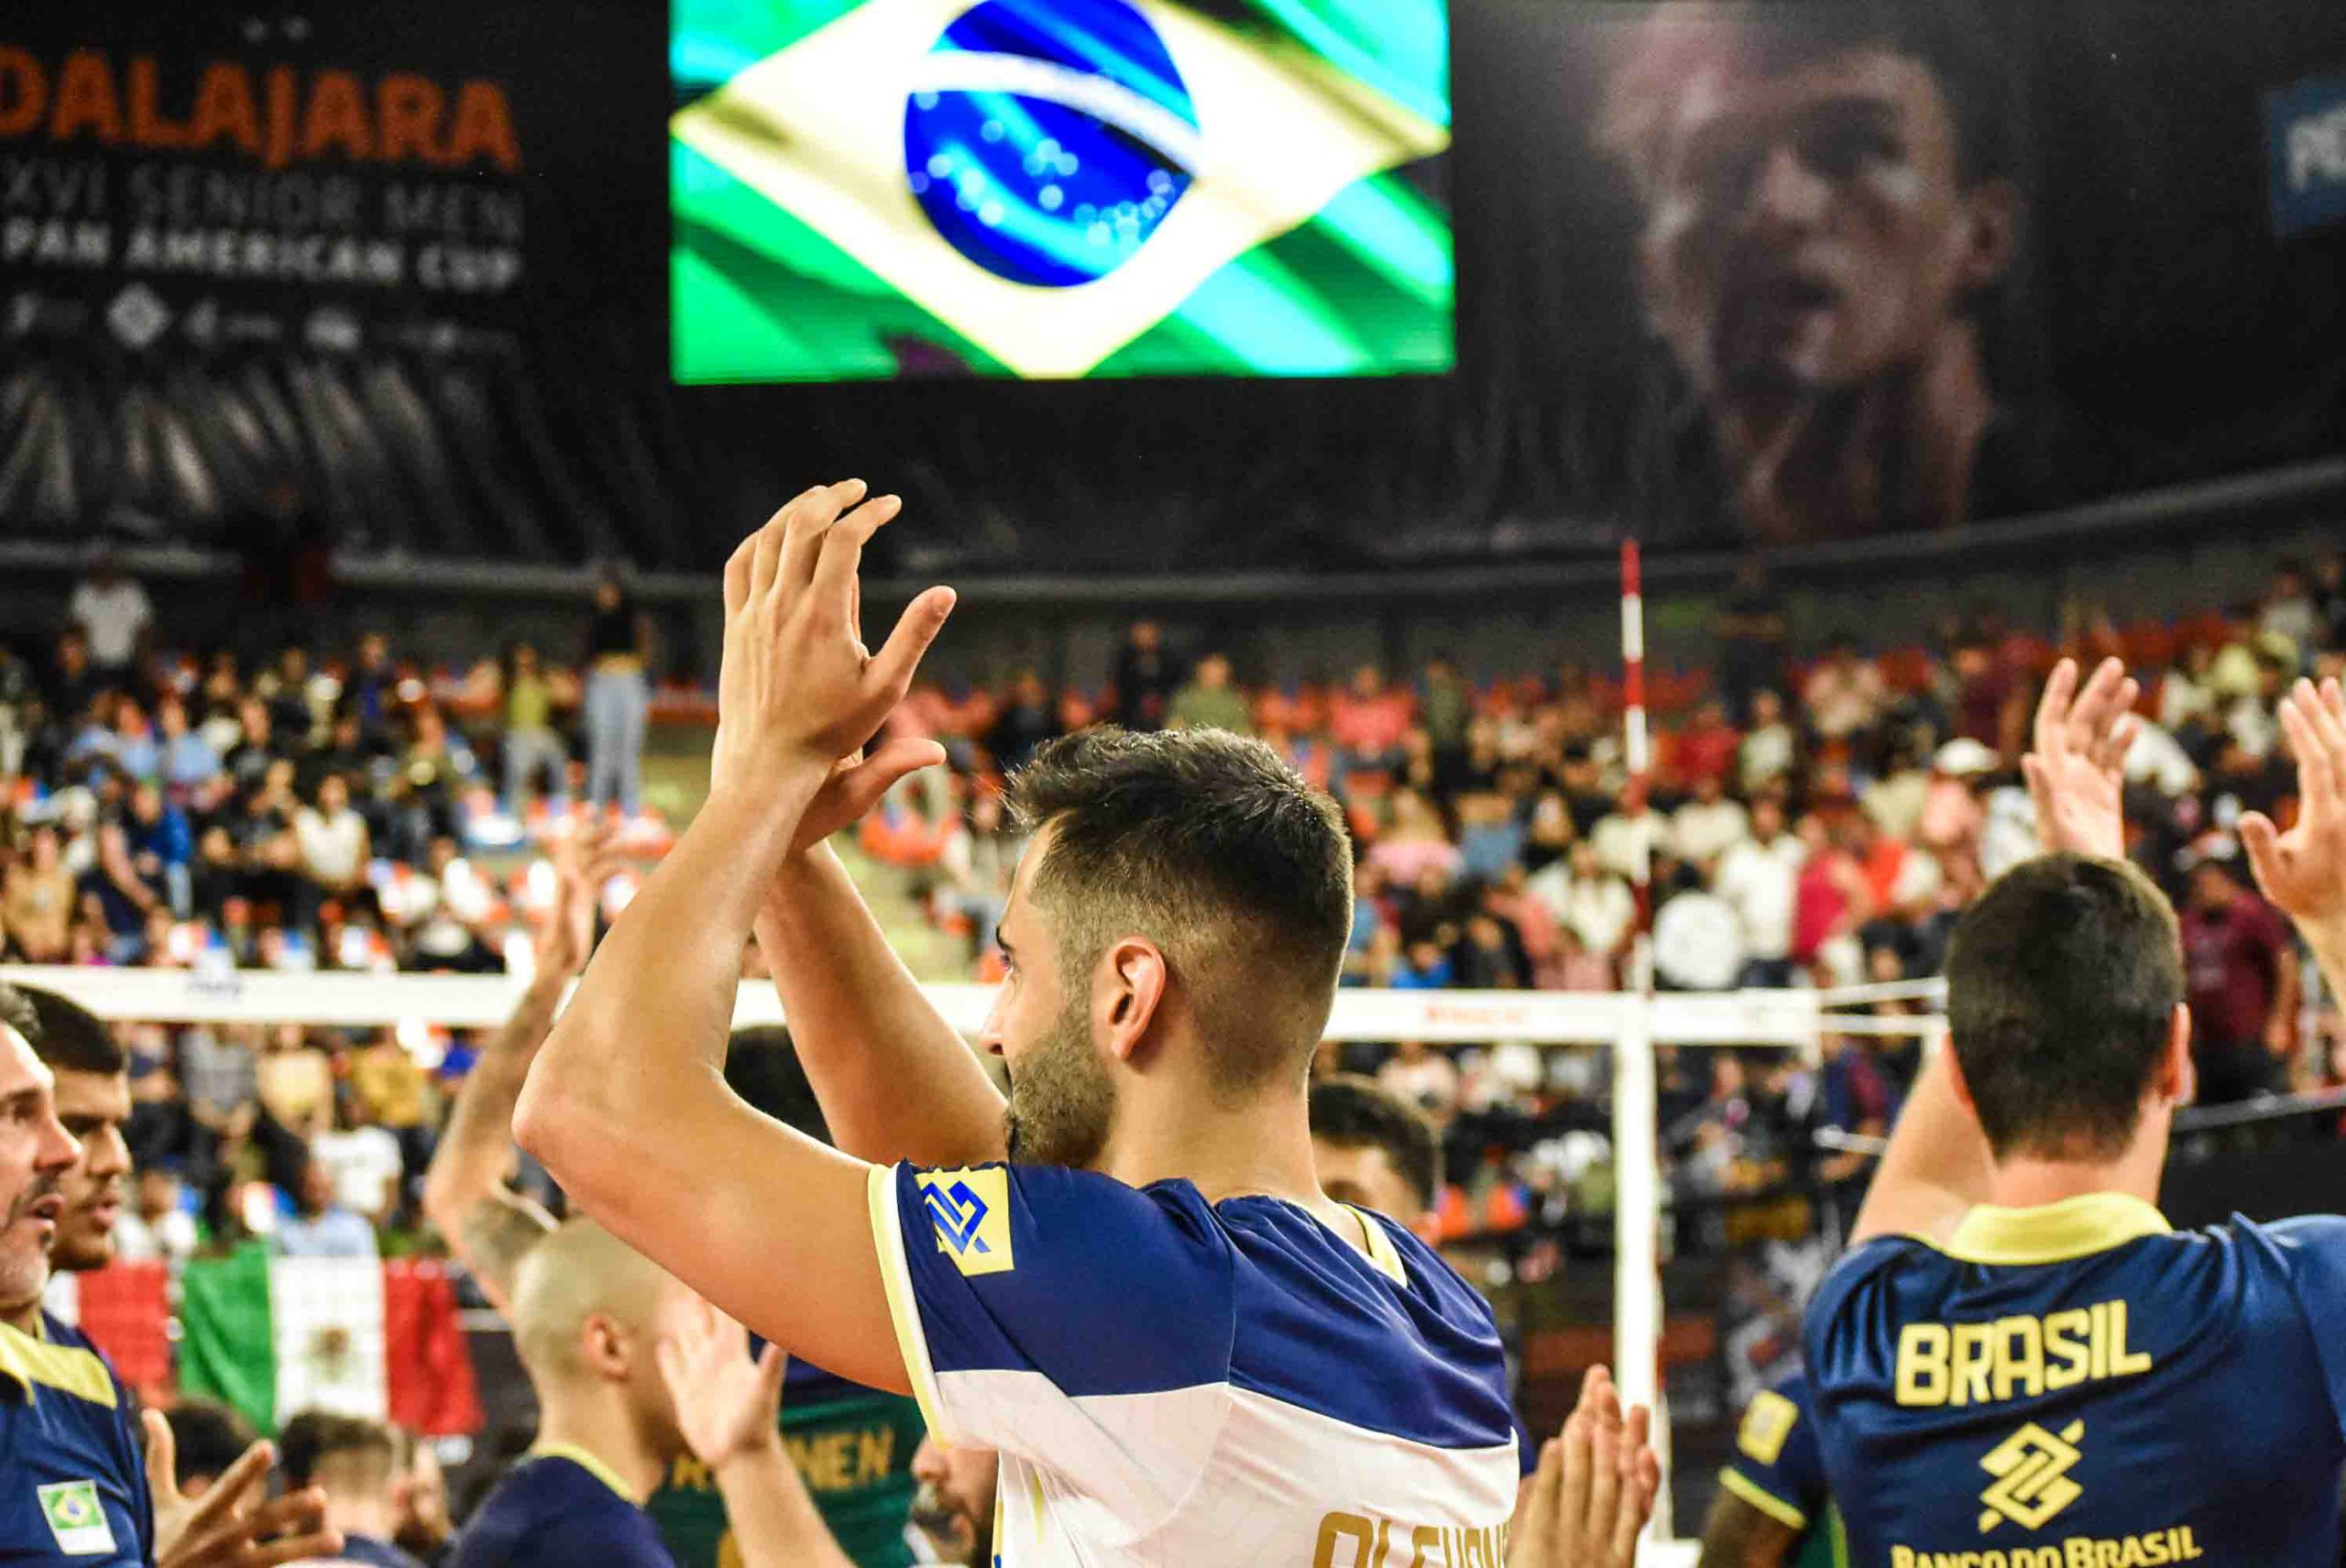 Brazil advances to the final defeating Chile 3-0